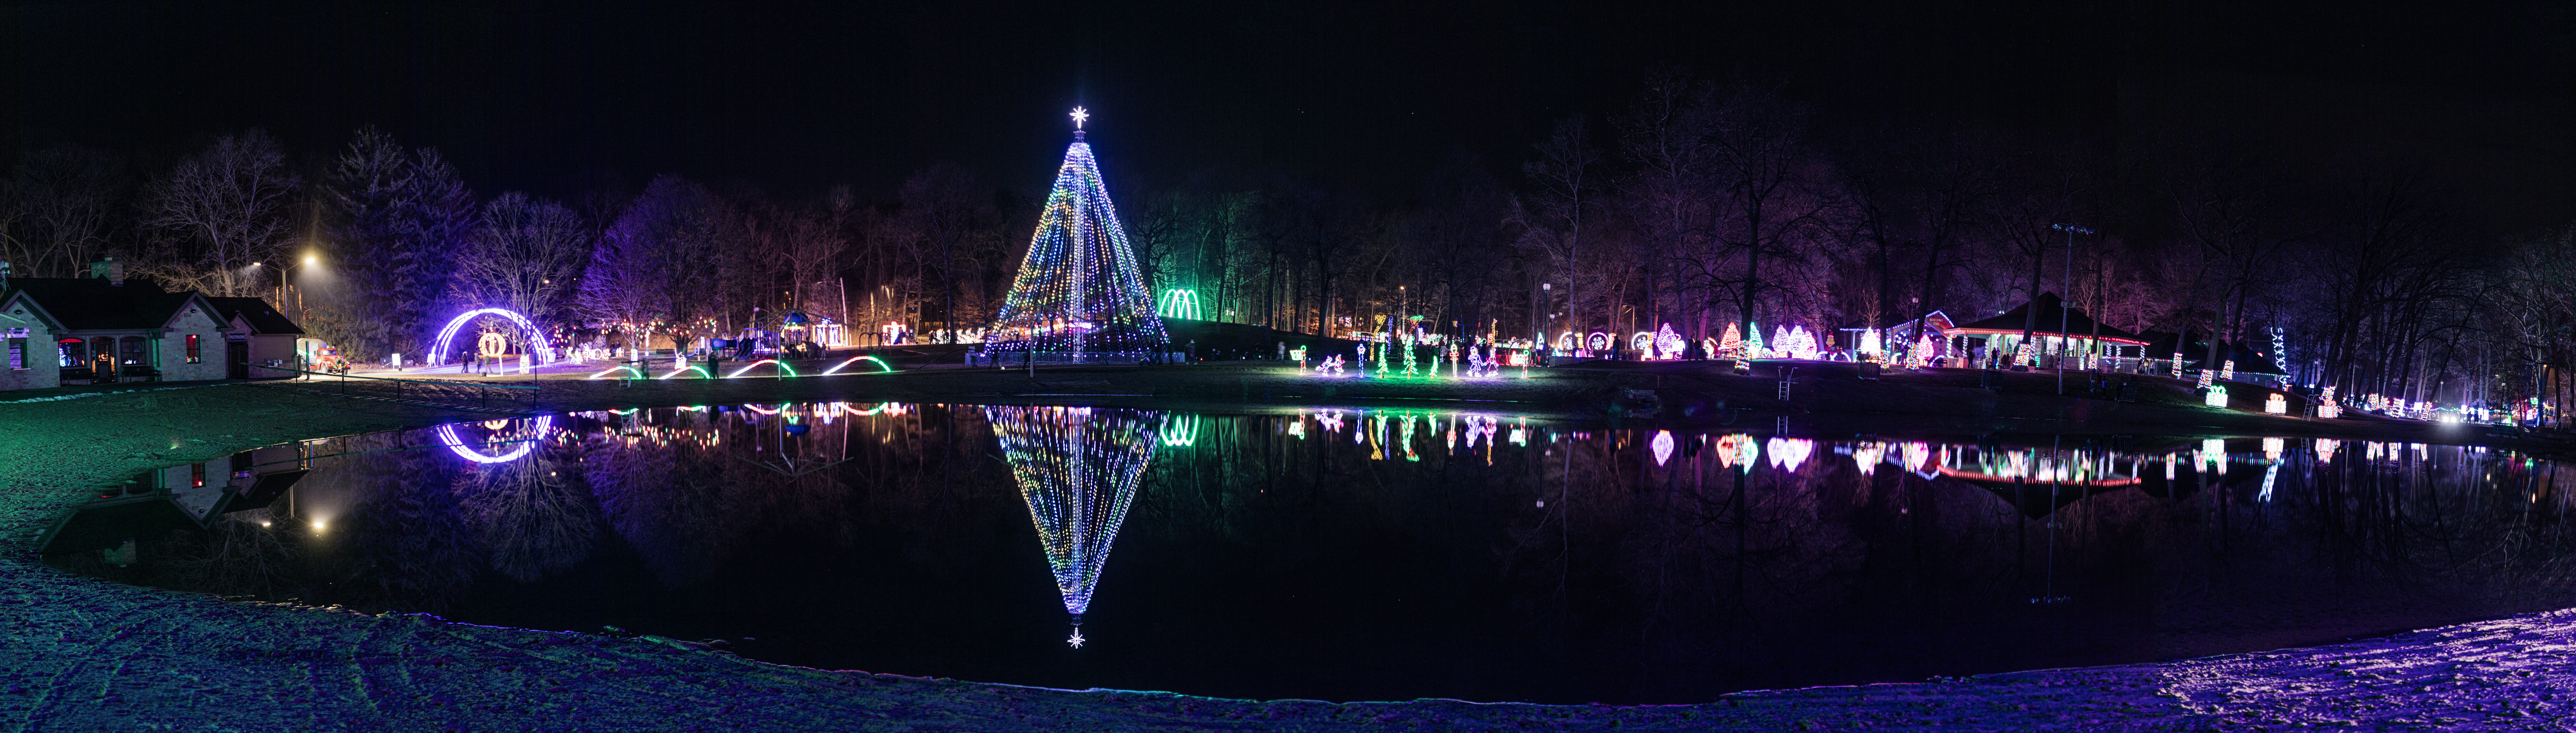 Wide view of holiday lights